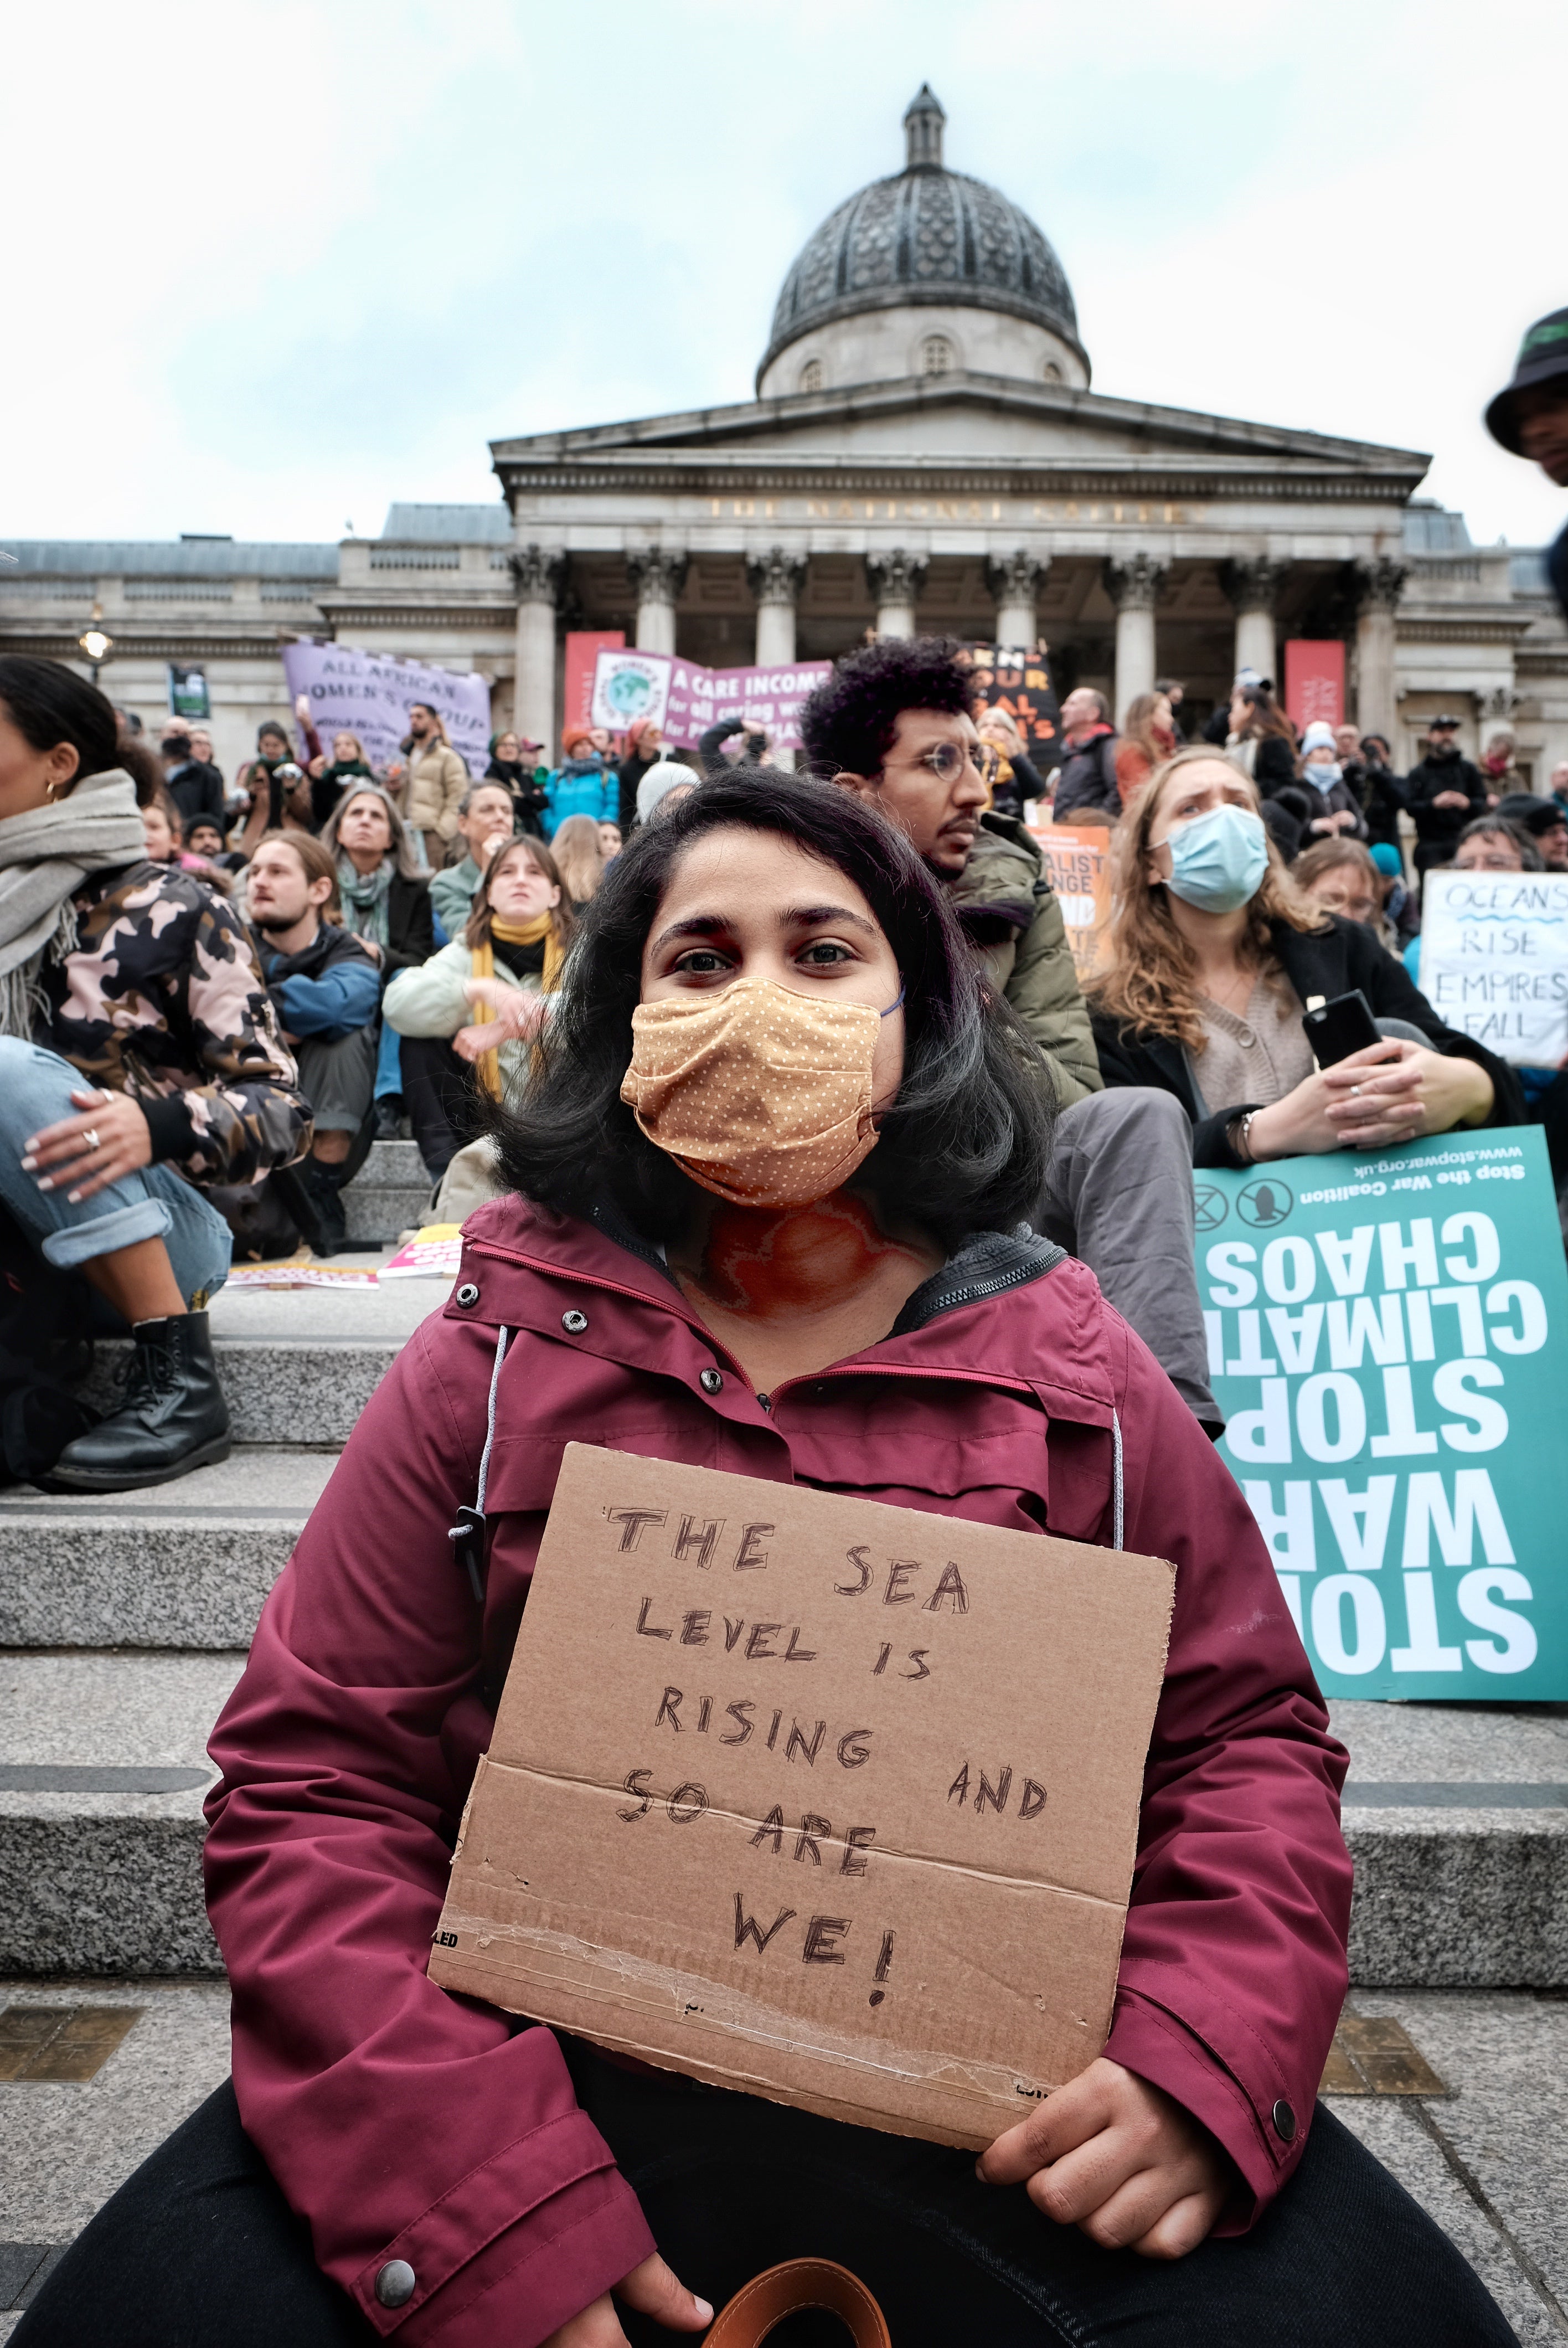 Protesters in Trafalgar Square on 6 November to demand action from world leaders to combat the climate crisis